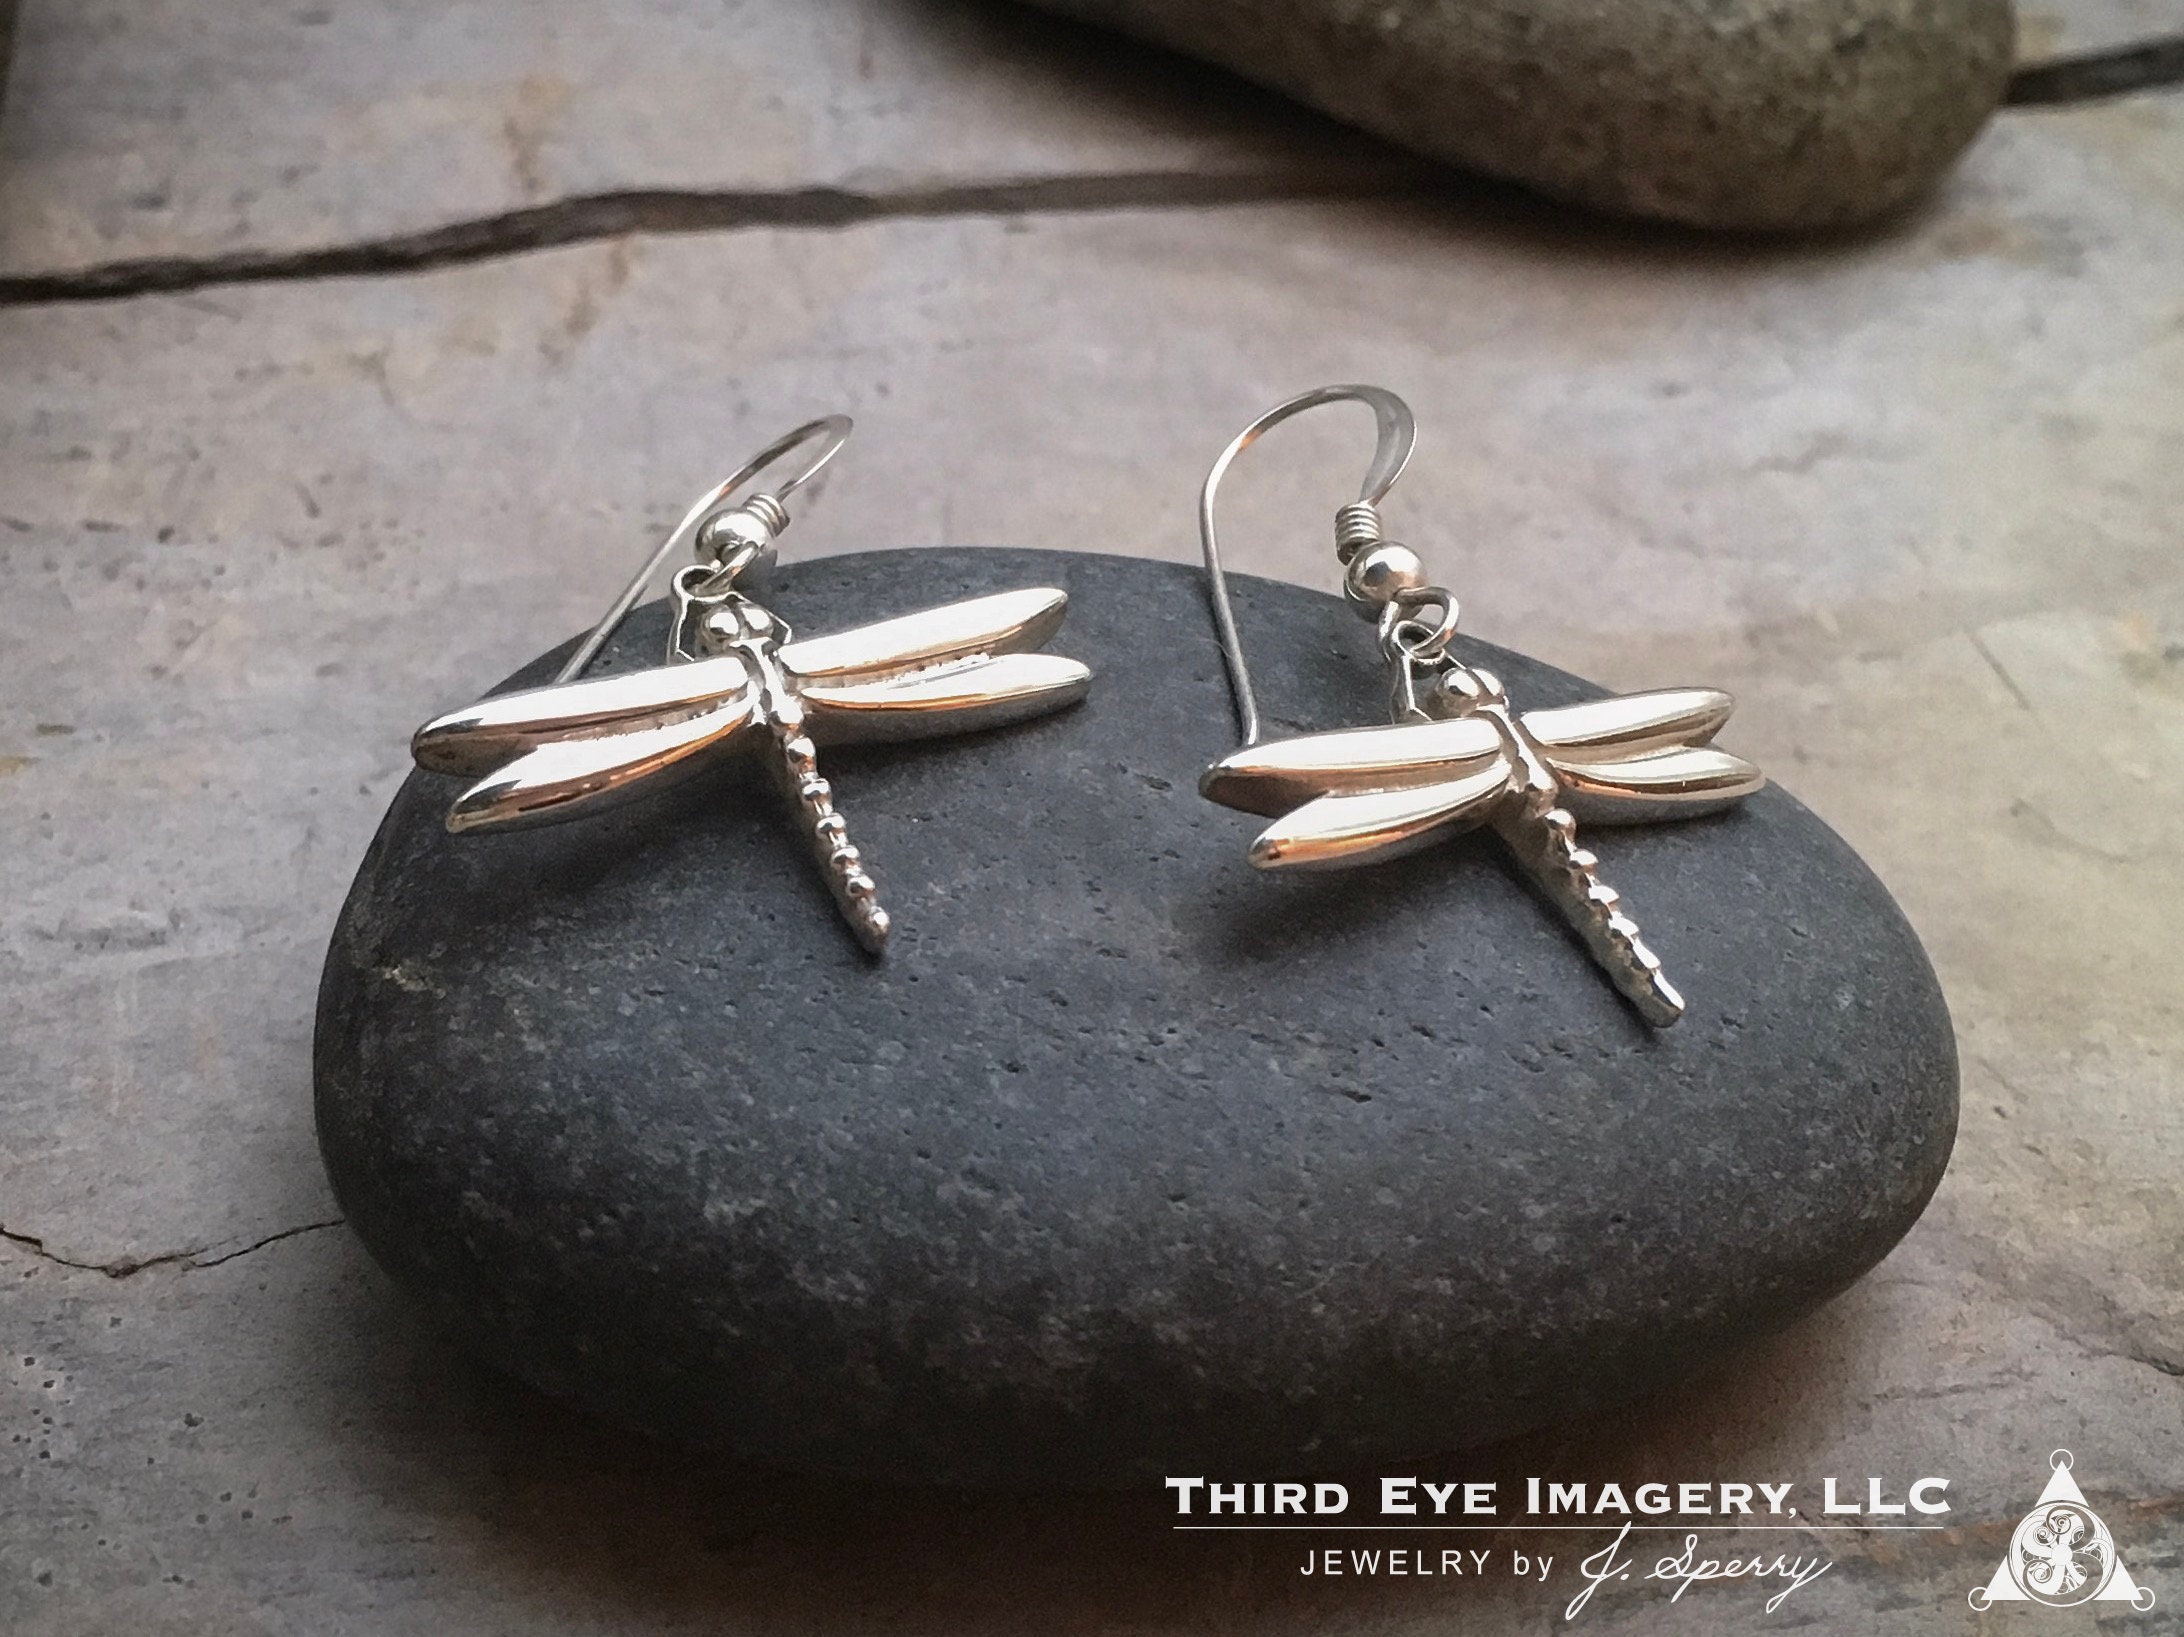 Dragonfly Earrings in solid Sterling Silver - Wonderful for anniversary gift, gift for mom, birthday gift, wife gift or gift for girlfriend.